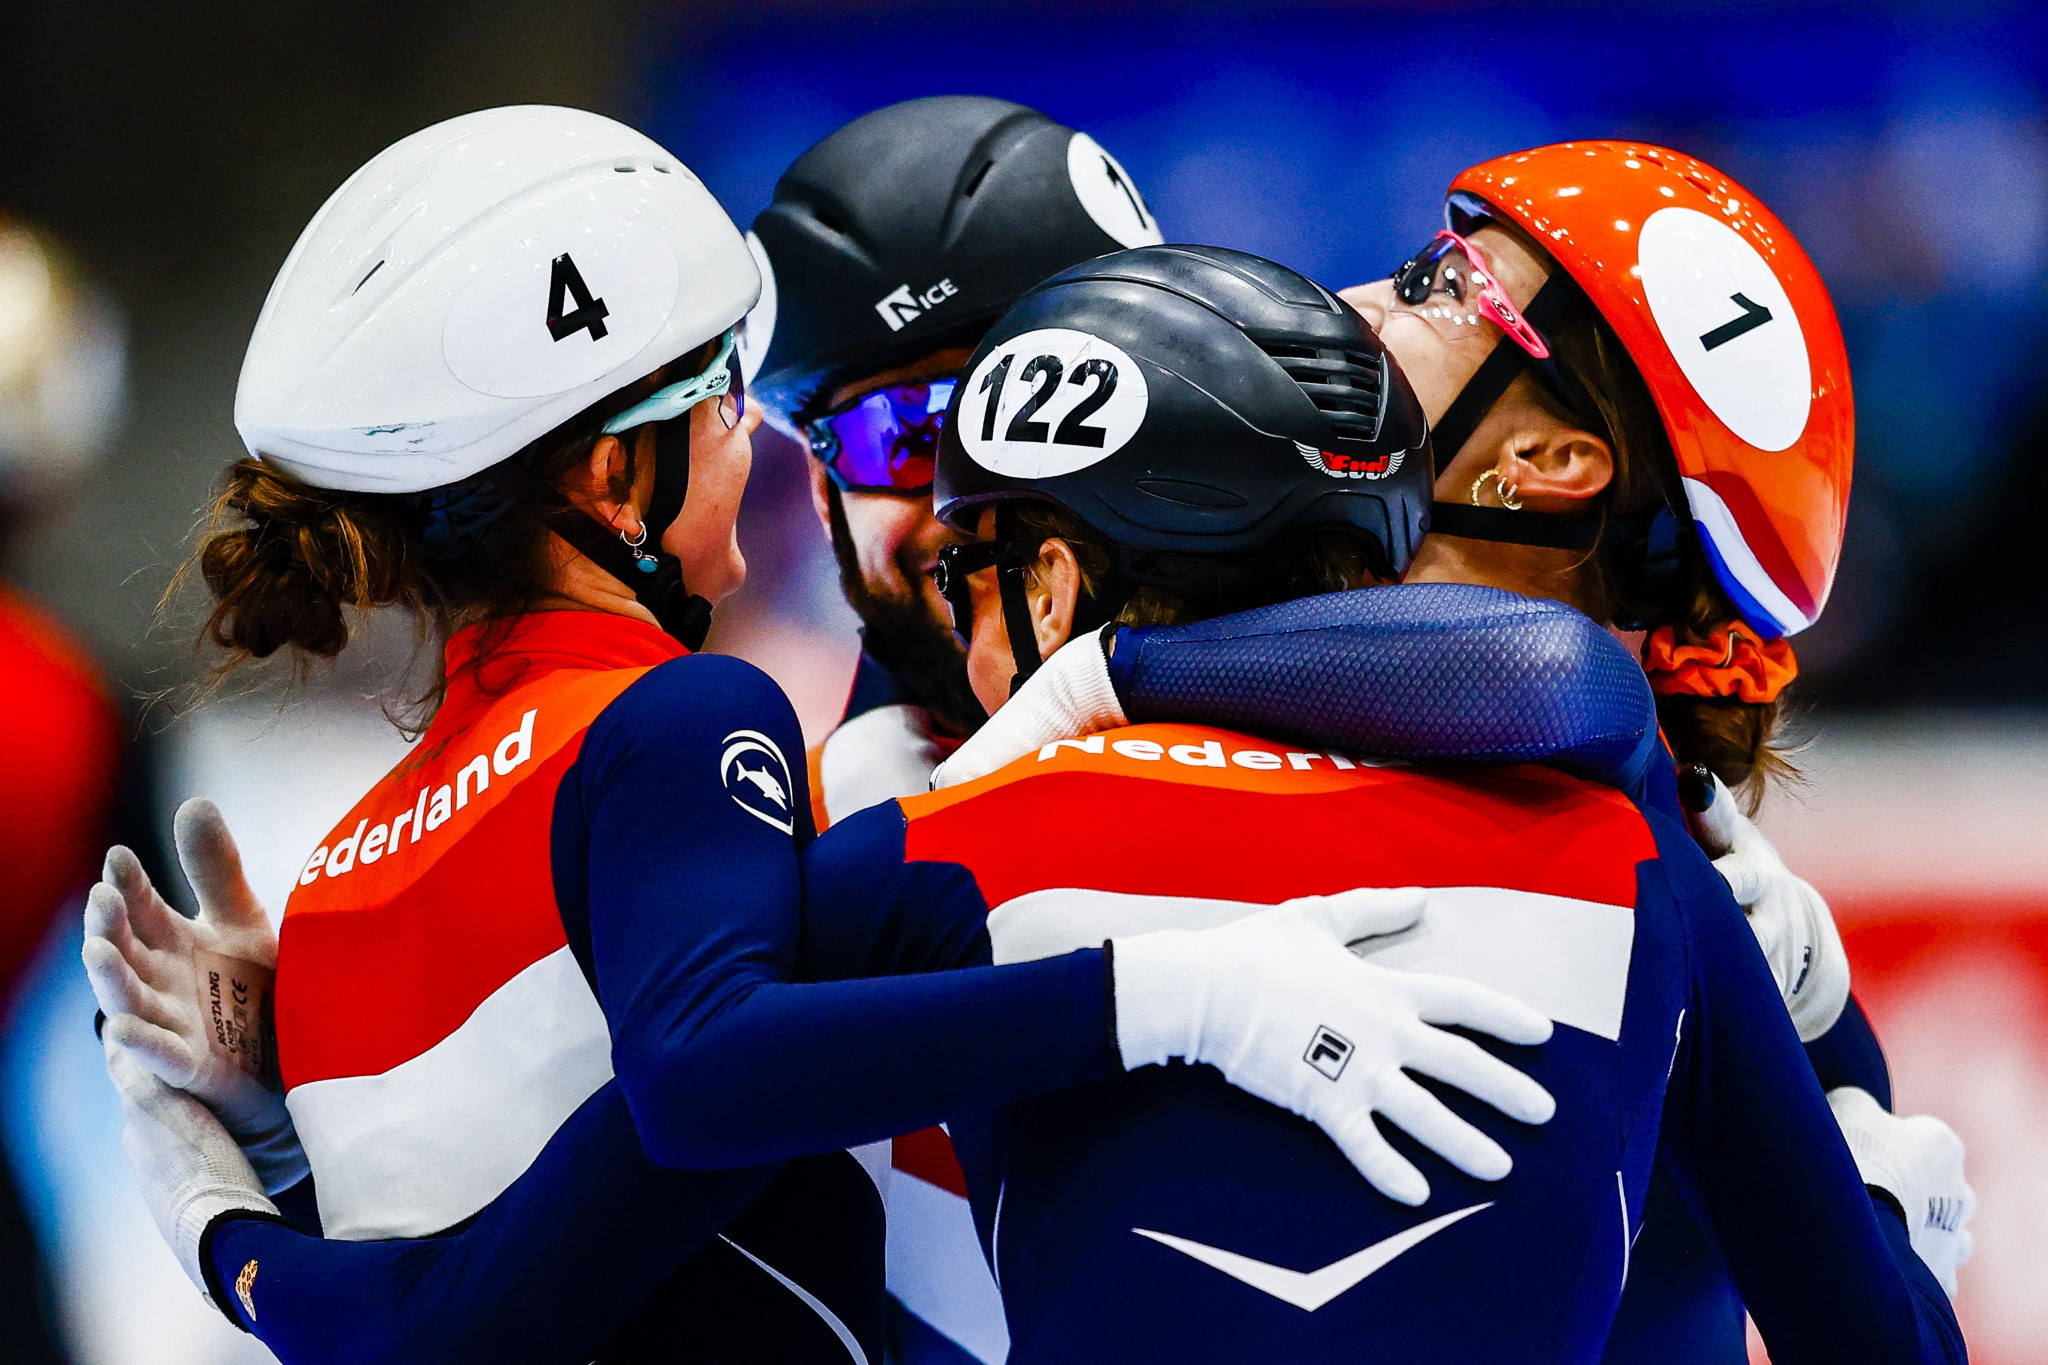 The Netherlands claimed gold today in the mixed 2,000m relay at the Short Track World Cup ©Getty Images